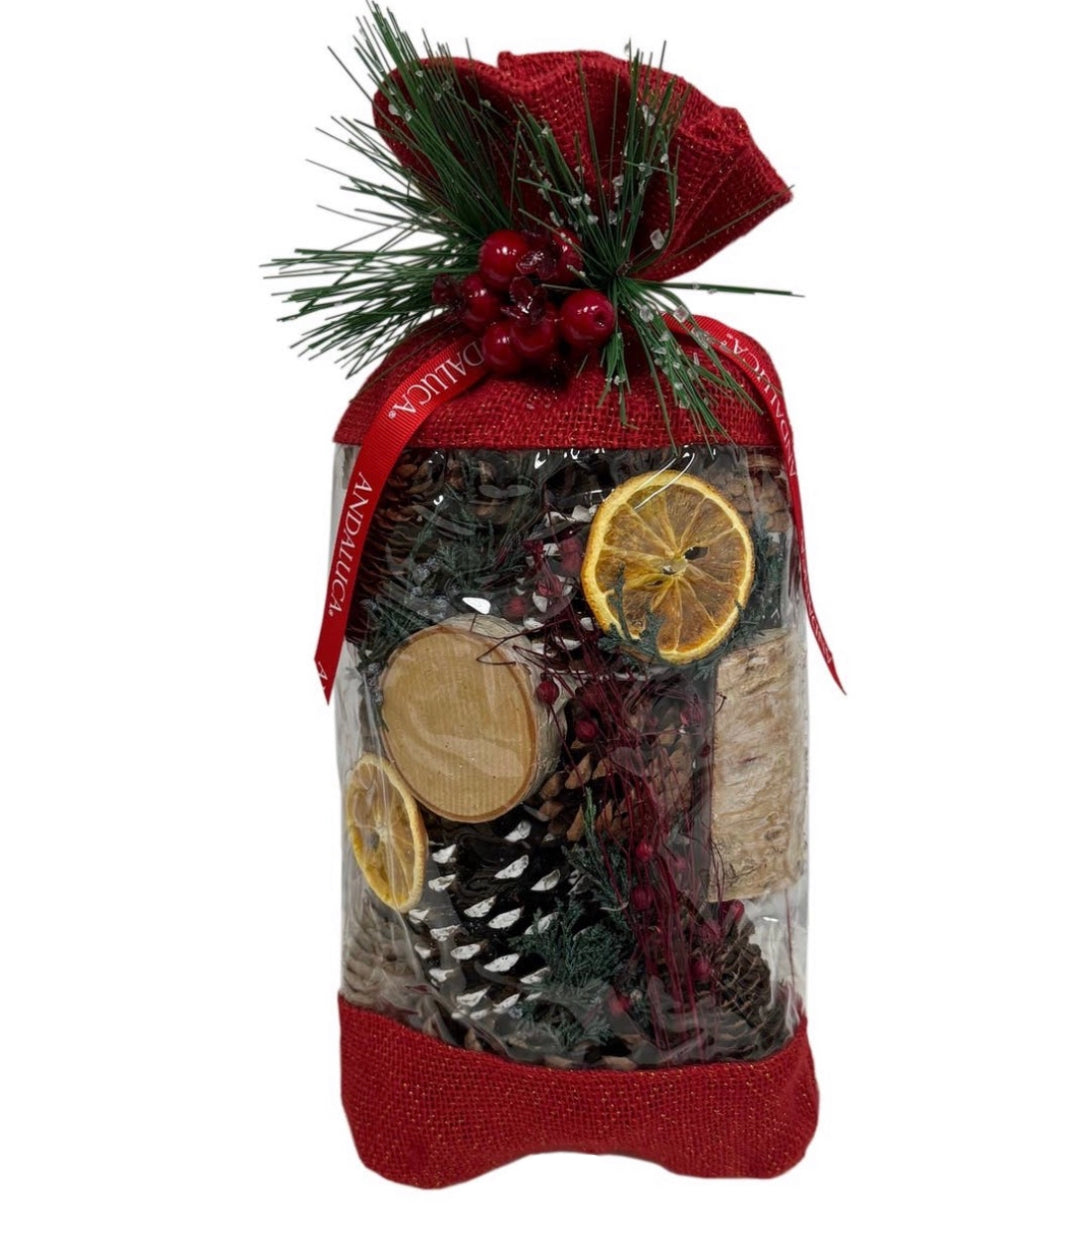 Large Holiday Memories Scented
Pinecone Bag